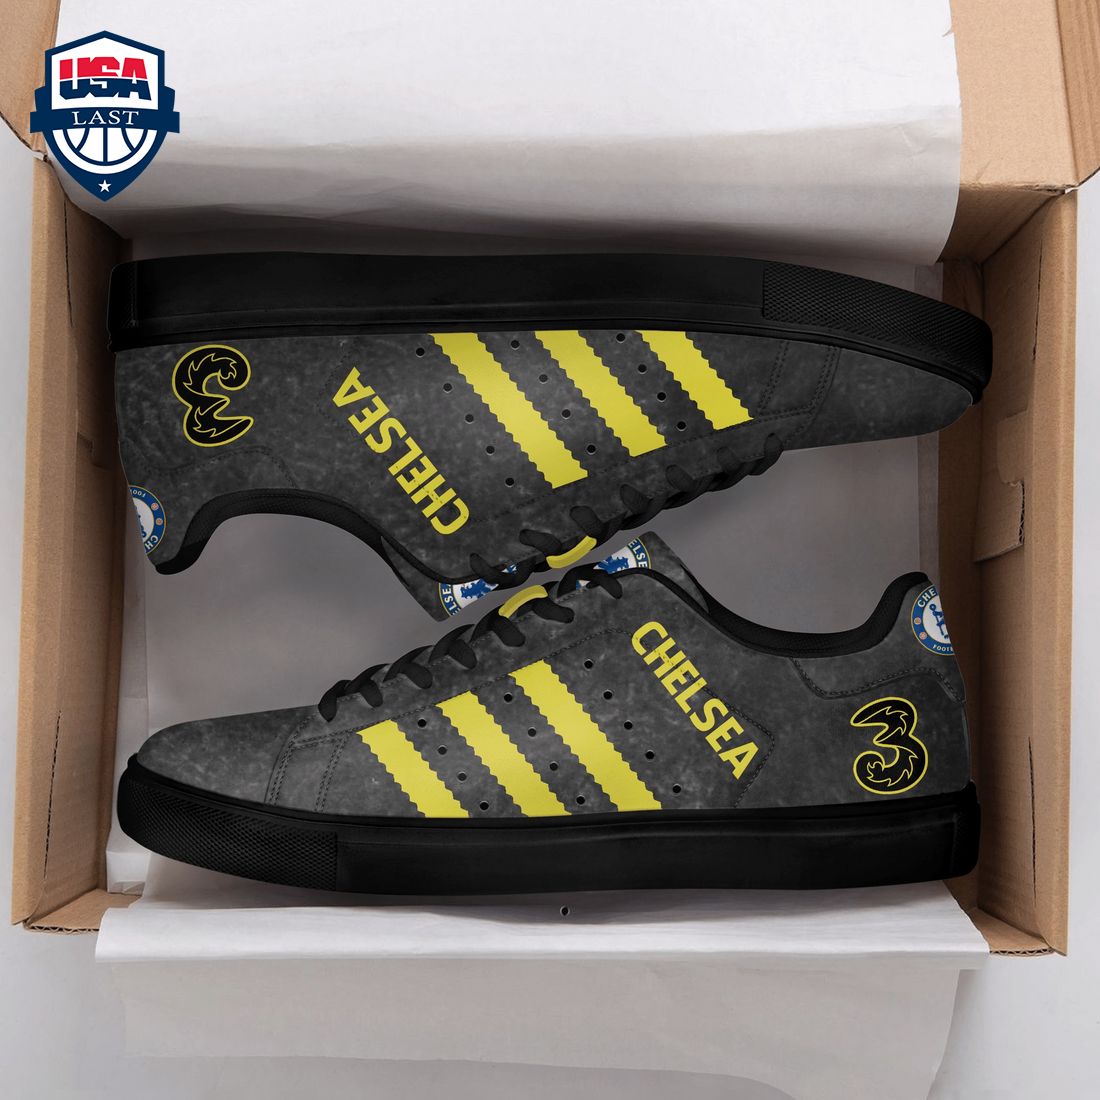 chelsea-fc-yellow-stripes-style-1-stan-smith-low-top-shoes-1-caTZh.jpg